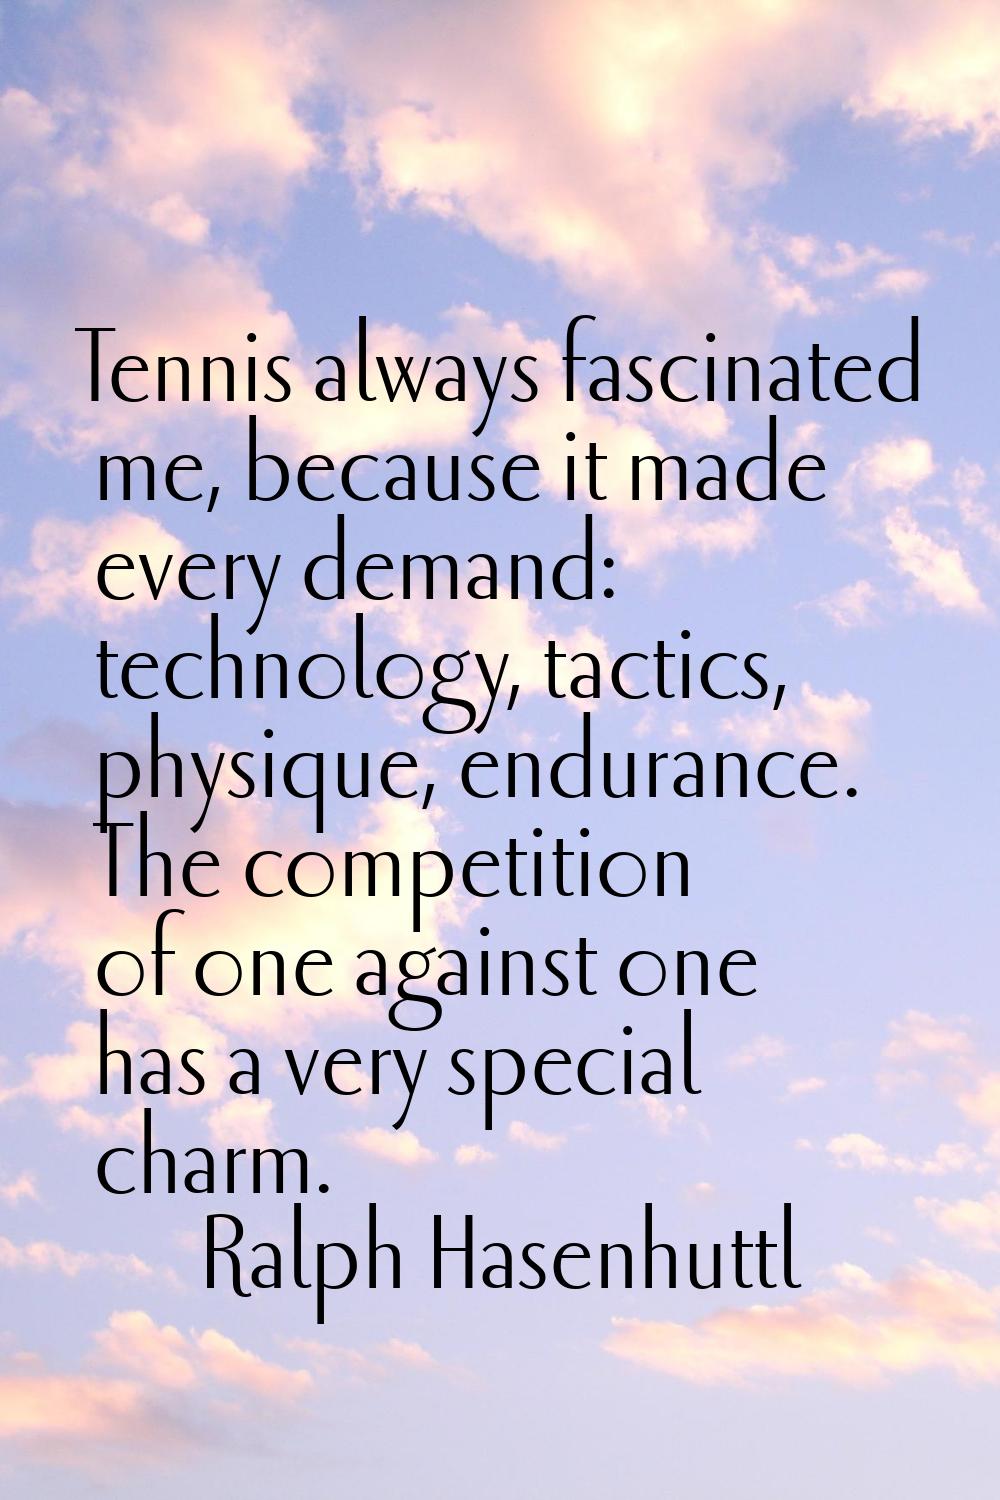 Tennis always fascinated me, because it made every demand: technology, tactics, physique, endurance